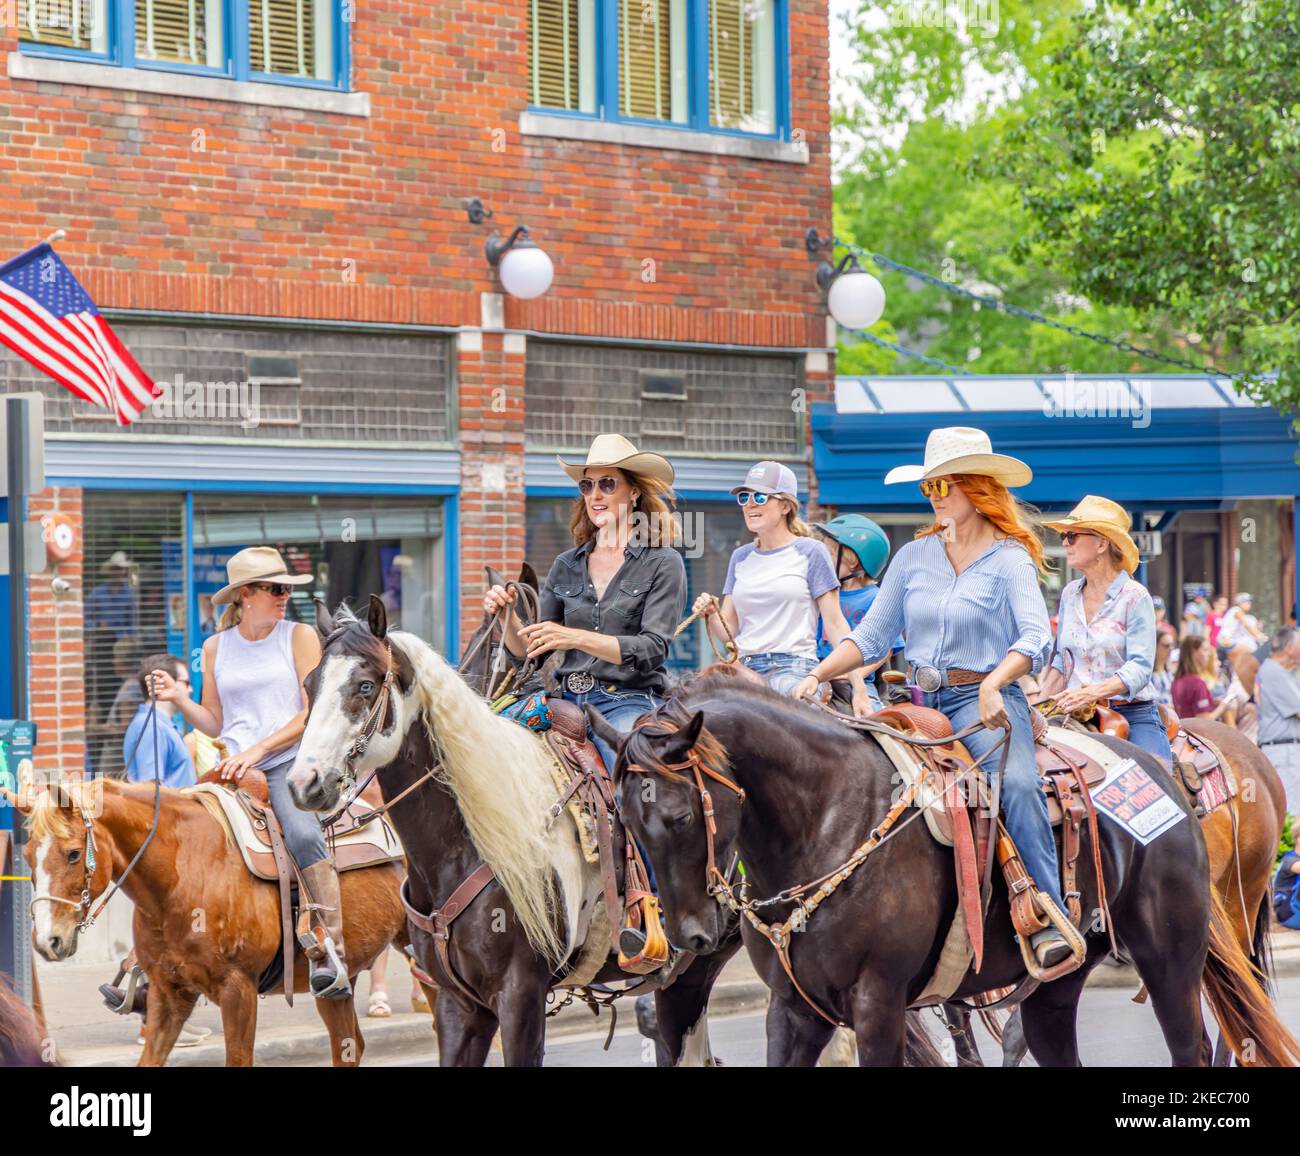 group of women riding horses in the Franklin Rodeo Parade Stock Photo